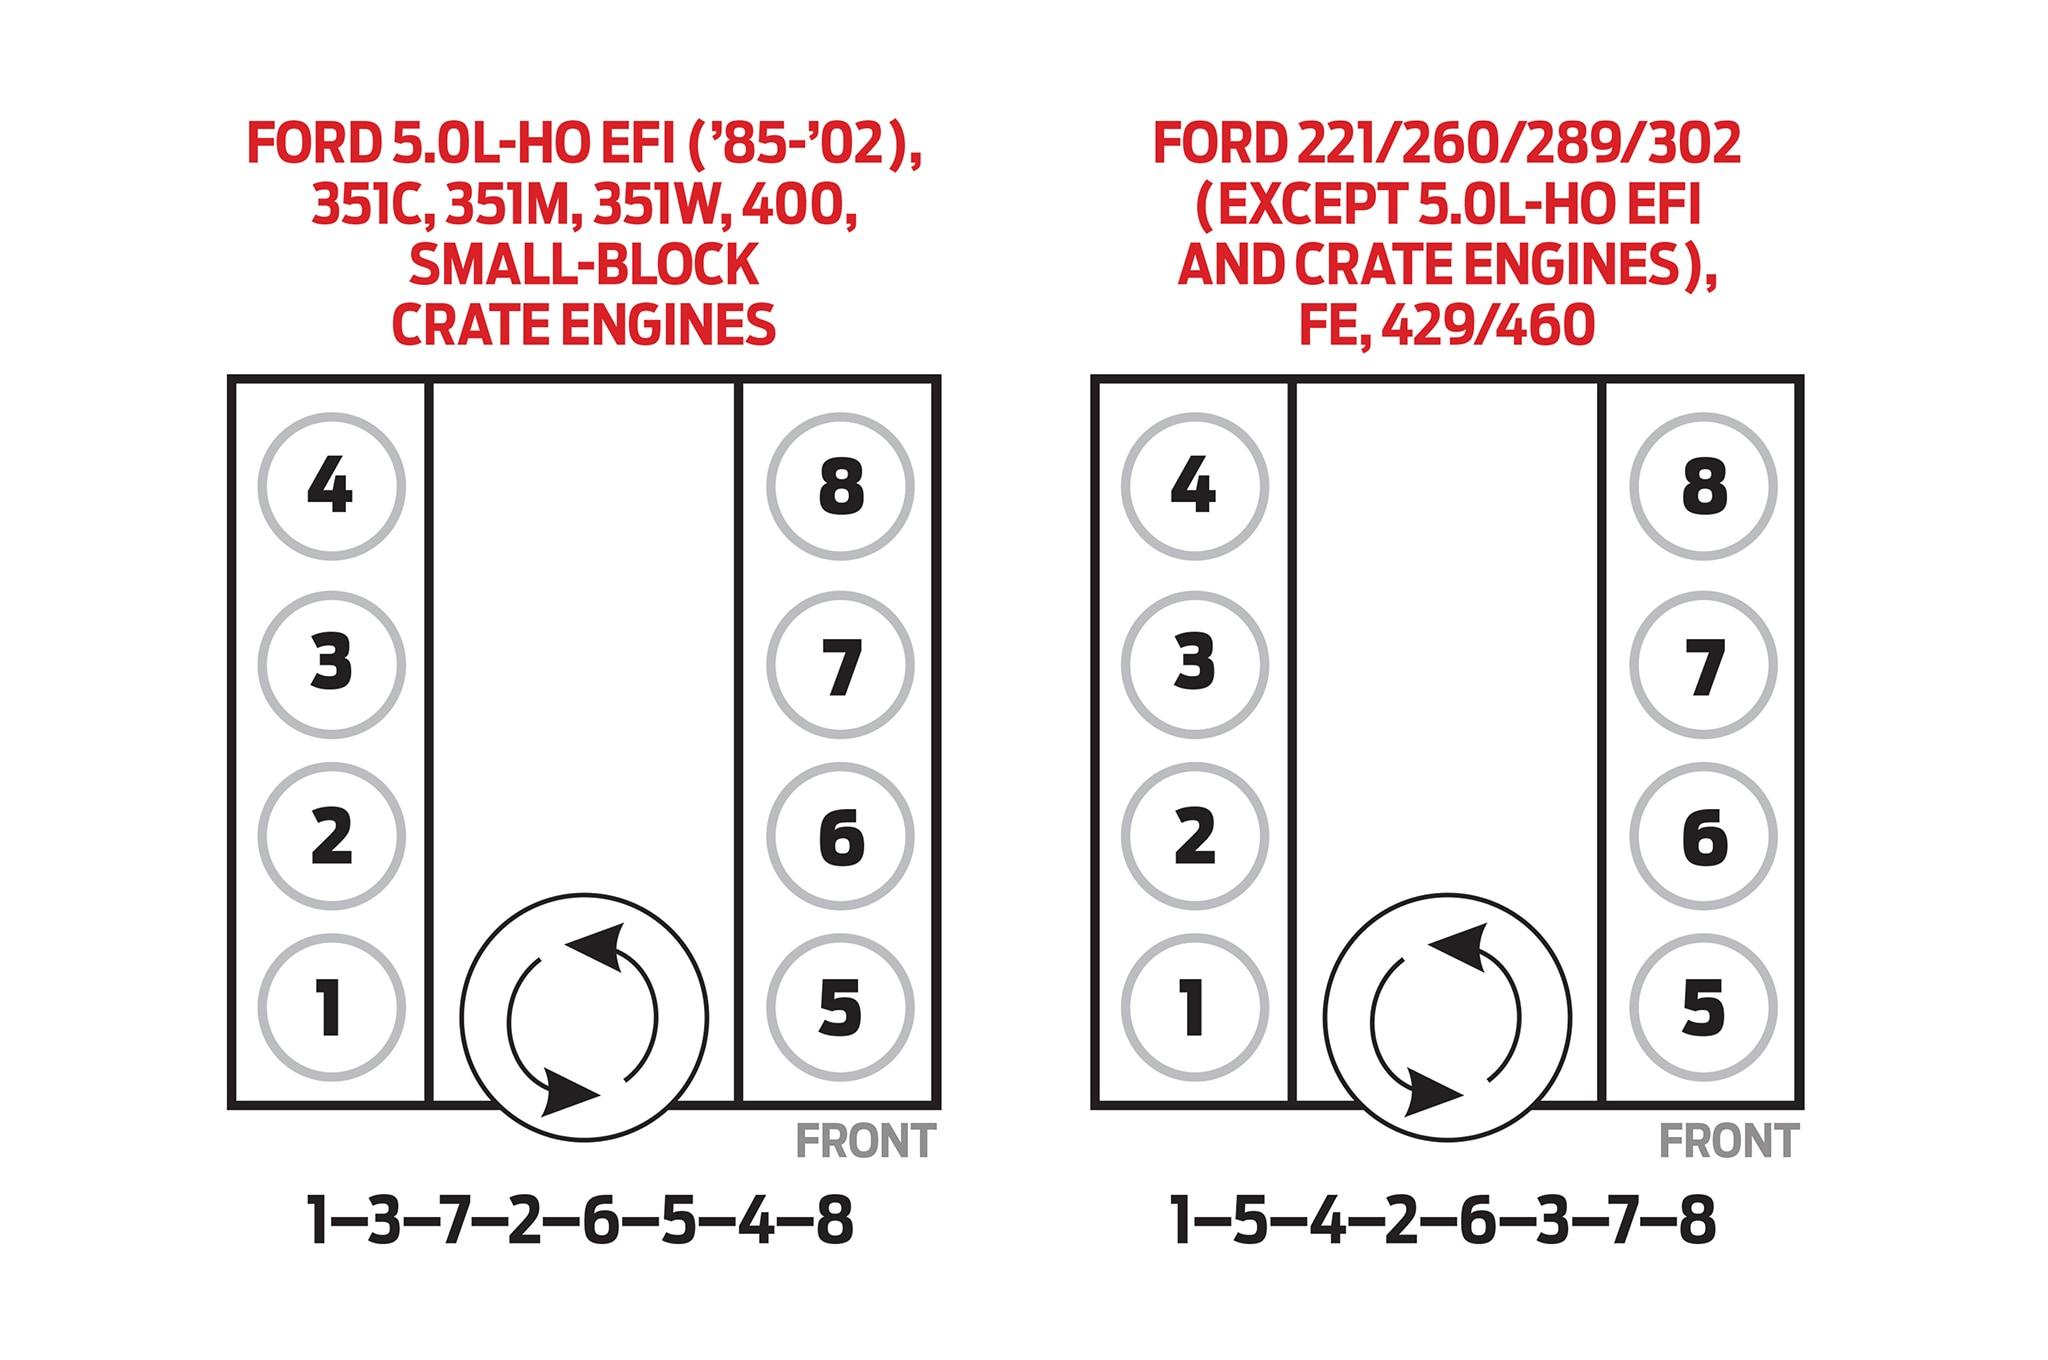 Firing Order For A Ford 390